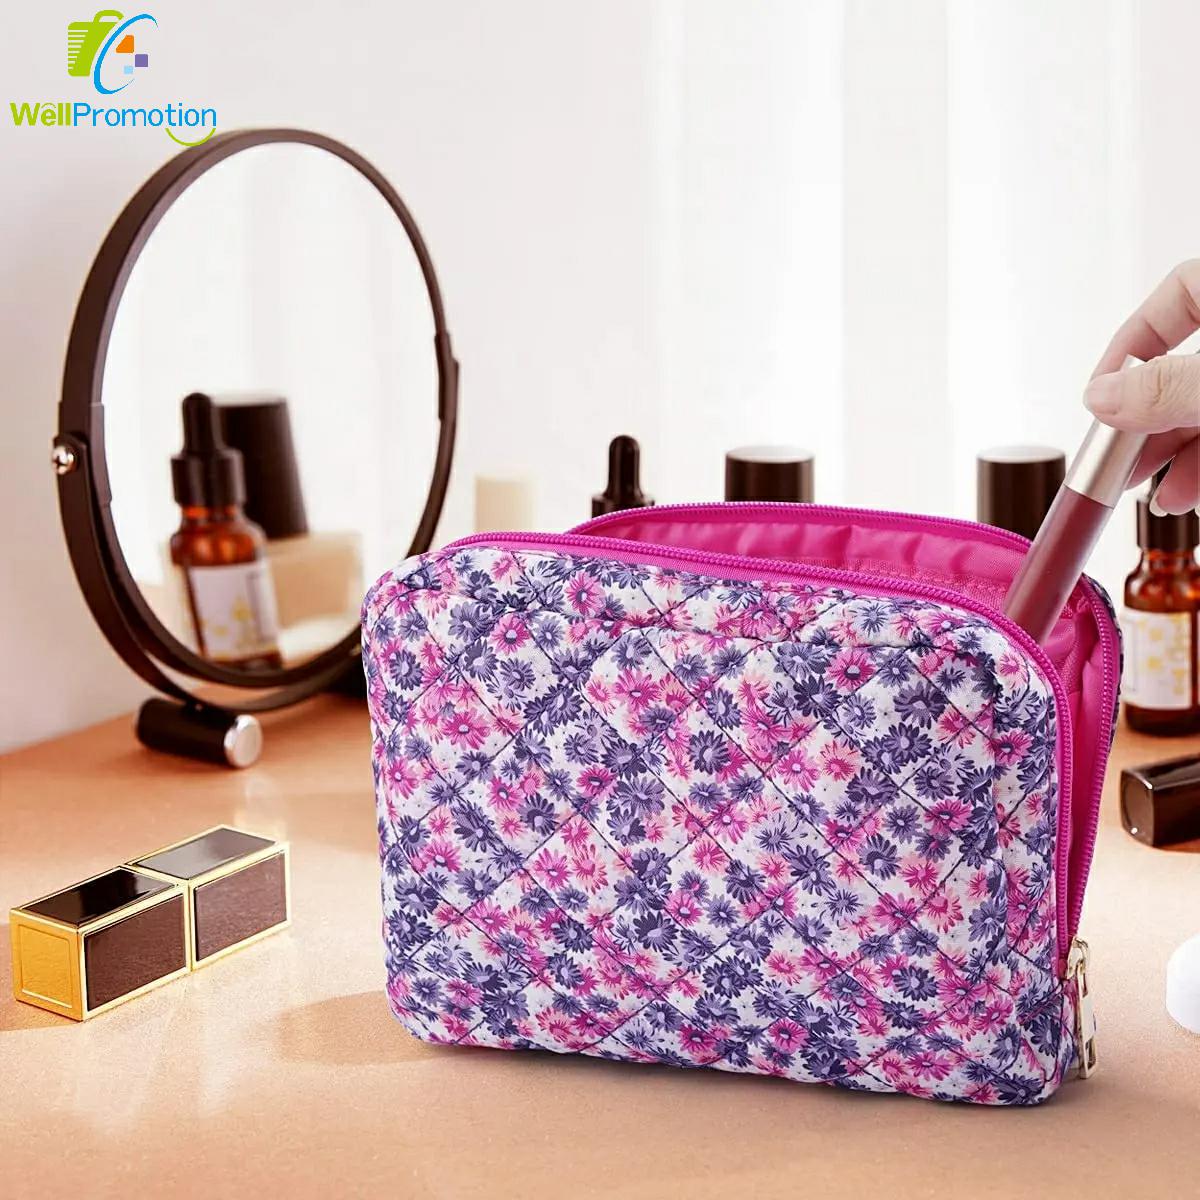 WellPromotion Customized Cosmetic Bags